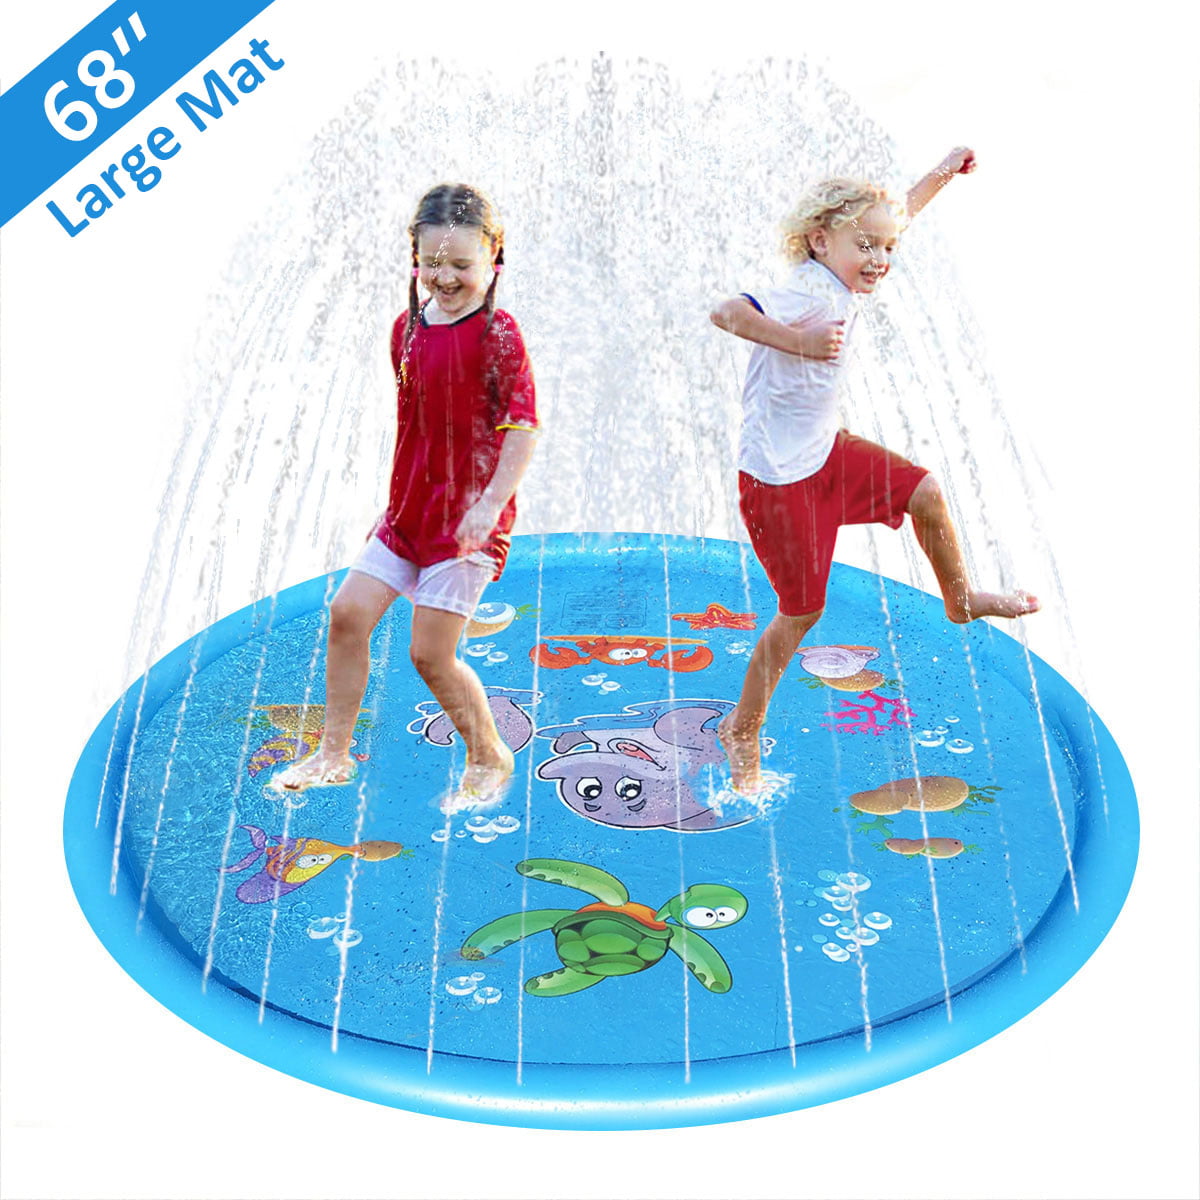 68" Inflatable Spray Splash Water Mat Kids Play Pad Outdoor Pool Beach Lawn Toys 